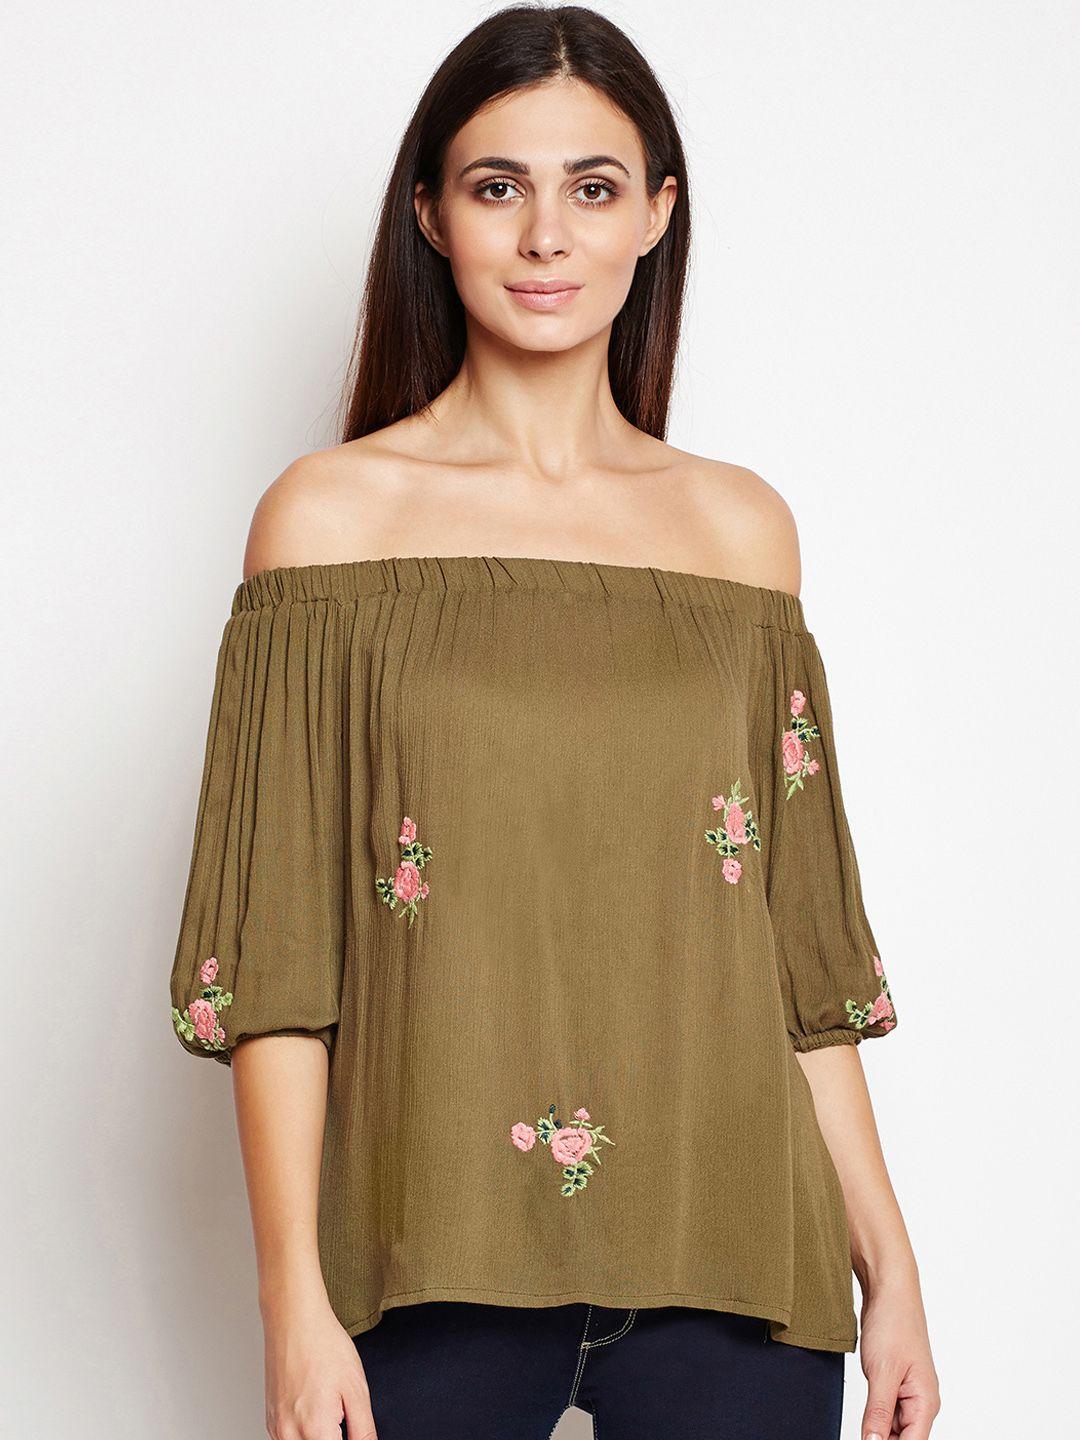 oxolloxo women olive brown floral print bardot top